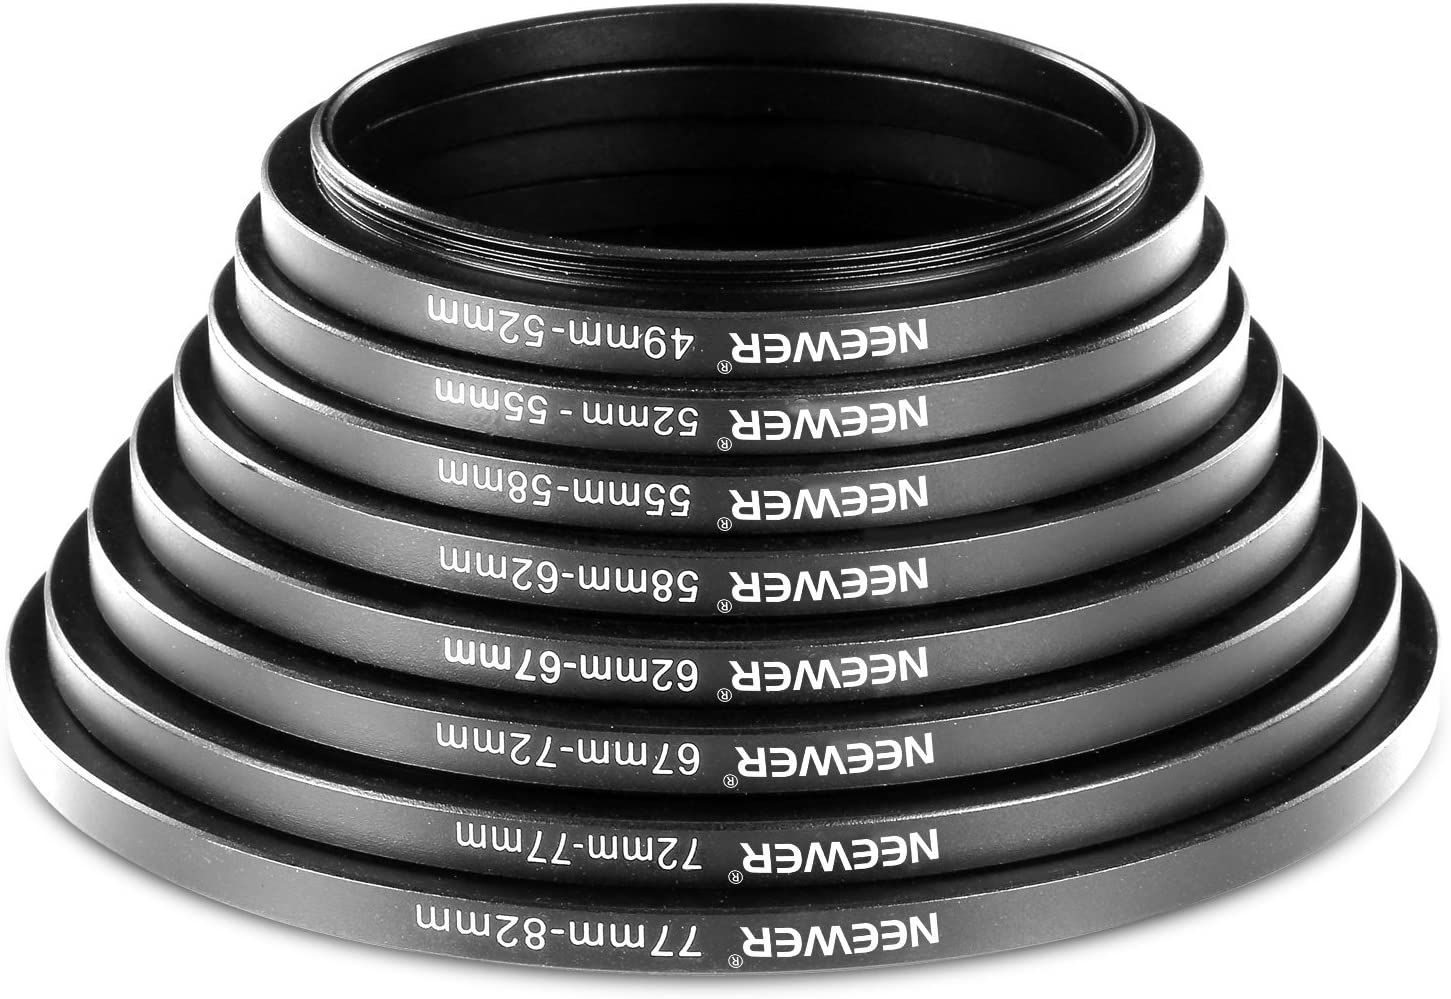 Neewer 8 Pieces Step-up Adapter Ring Set Sizes